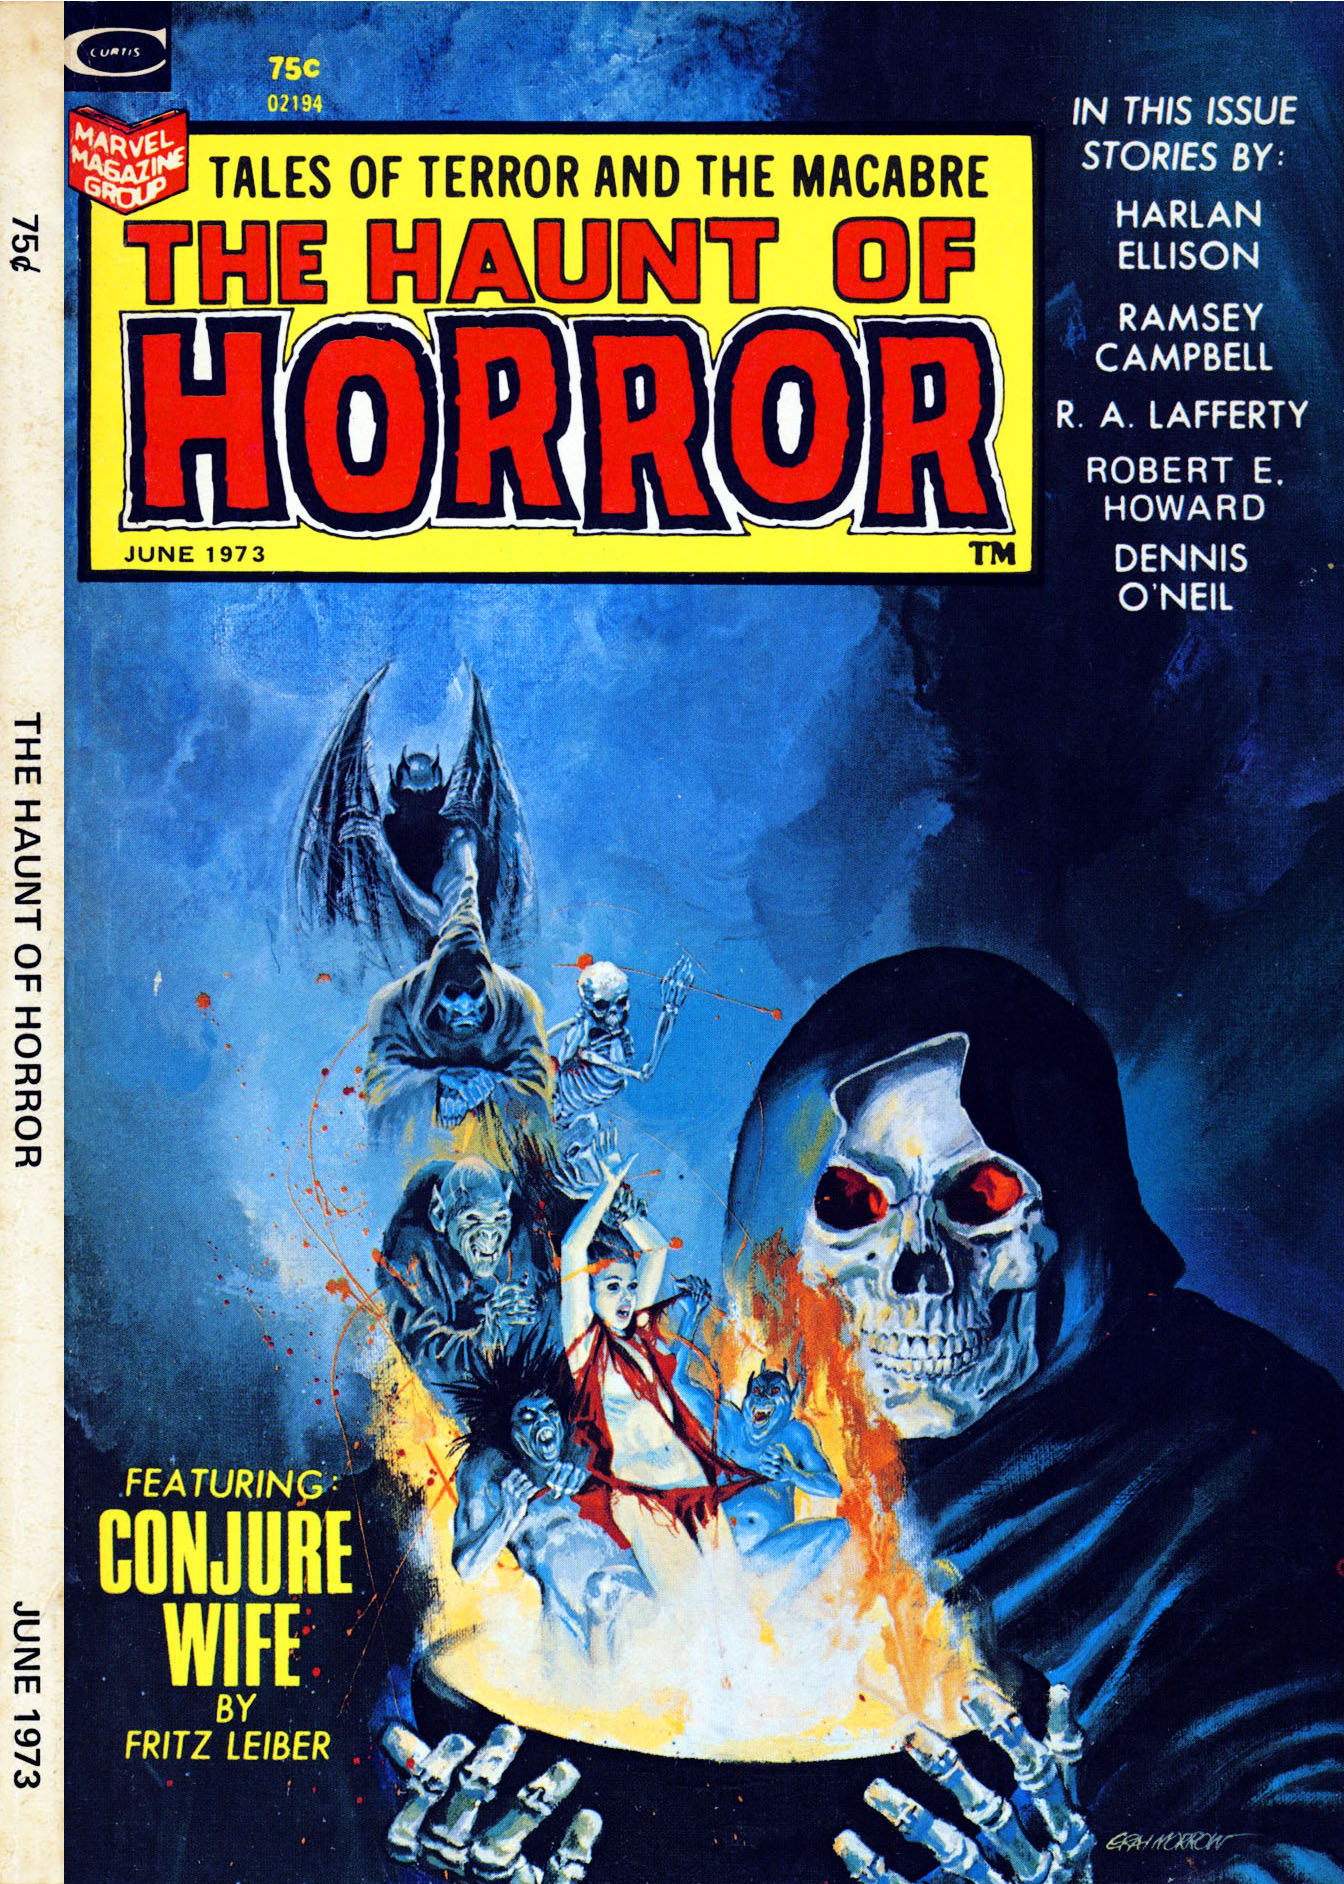 Read online The Haunt of Horror comic -  Issue # TPB 1 - 1